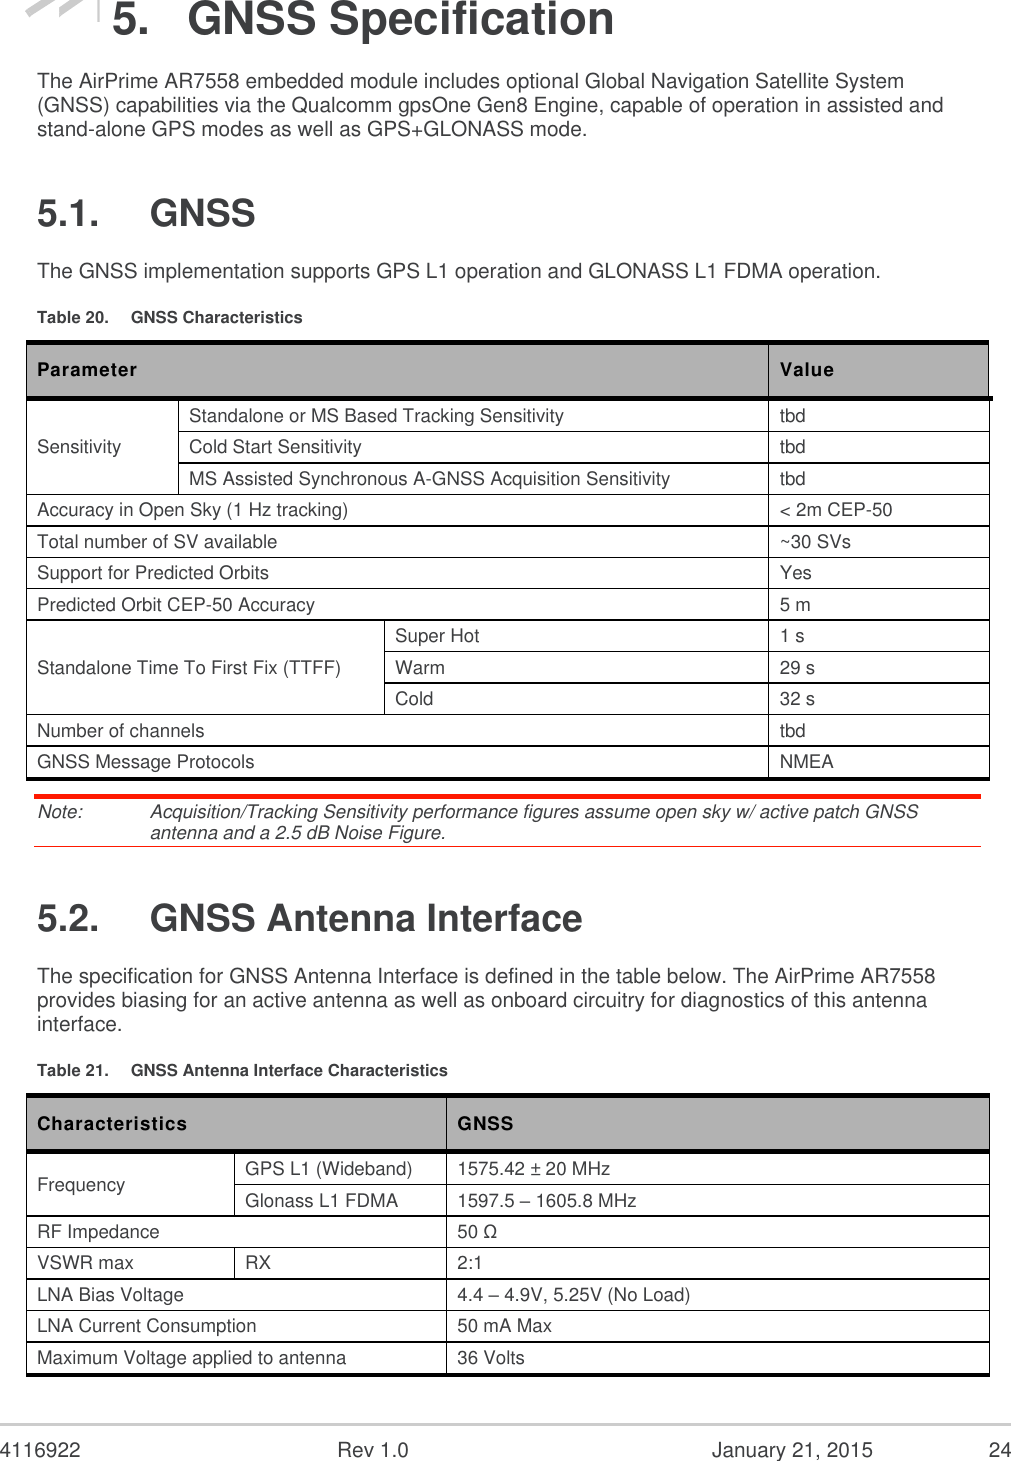  4116922  Rev 1.0  January 21, 2015  24 5.  GNSS Specification The AirPrime AR7558 embedded module includes optional Global Navigation Satellite System (GNSS) capabilities via the Qualcomm gpsOne Gen8 Engine, capable of operation in assisted and stand-alone GPS modes as well as GPS+GLONASS mode. 5.1.  GNSS The GNSS implementation supports GPS L1 operation and GLONASS L1 FDMA operation. Table 20.  GNSS Characteristics Parameter Value Sensitivity Standalone or MS Based Tracking Sensitivity tbd Cold Start Sensitivity tbd MS Assisted Synchronous A-GNSS Acquisition Sensitivity tbd Accuracy in Open Sky (1 Hz tracking) &lt; 2m CEP-50 Total number of SV available ~30 SVs Support for Predicted Orbits Yes Predicted Orbit CEP-50 Accuracy 5 m Standalone Time To First Fix (TTFF) Super Hot 1 s Warm 29 s Cold 32 s Number of channels tbd GNSS Message Protocols NMEA Note:   Acquisition/Tracking Sensitivity performance figures assume open sky w/ active patch GNSS antenna and a 2.5 dB Noise Figure. 5.2.  GNSS Antenna Interface The specification for GNSS Antenna Interface is defined in the table below. The AirPrime AR7558 provides biasing for an active antenna as well as onboard circuitry for diagnostics of this antenna interface. Table 21.  GNSS Antenna Interface Characteristics Characteristics GNSS Frequency GPS L1 (Wideband) 1575.42 ± 20 MHz Glonass L1 FDMA 1597.5 – 1605.8 MHz RF Impedance 50 Ω VSWR max RX 2:1 LNA Bias Voltage 4.4 – 4.9V, 5.25V (No Load) LNA Current Consumption 50 mA Max Maximum Voltage applied to antenna 36 Volts 